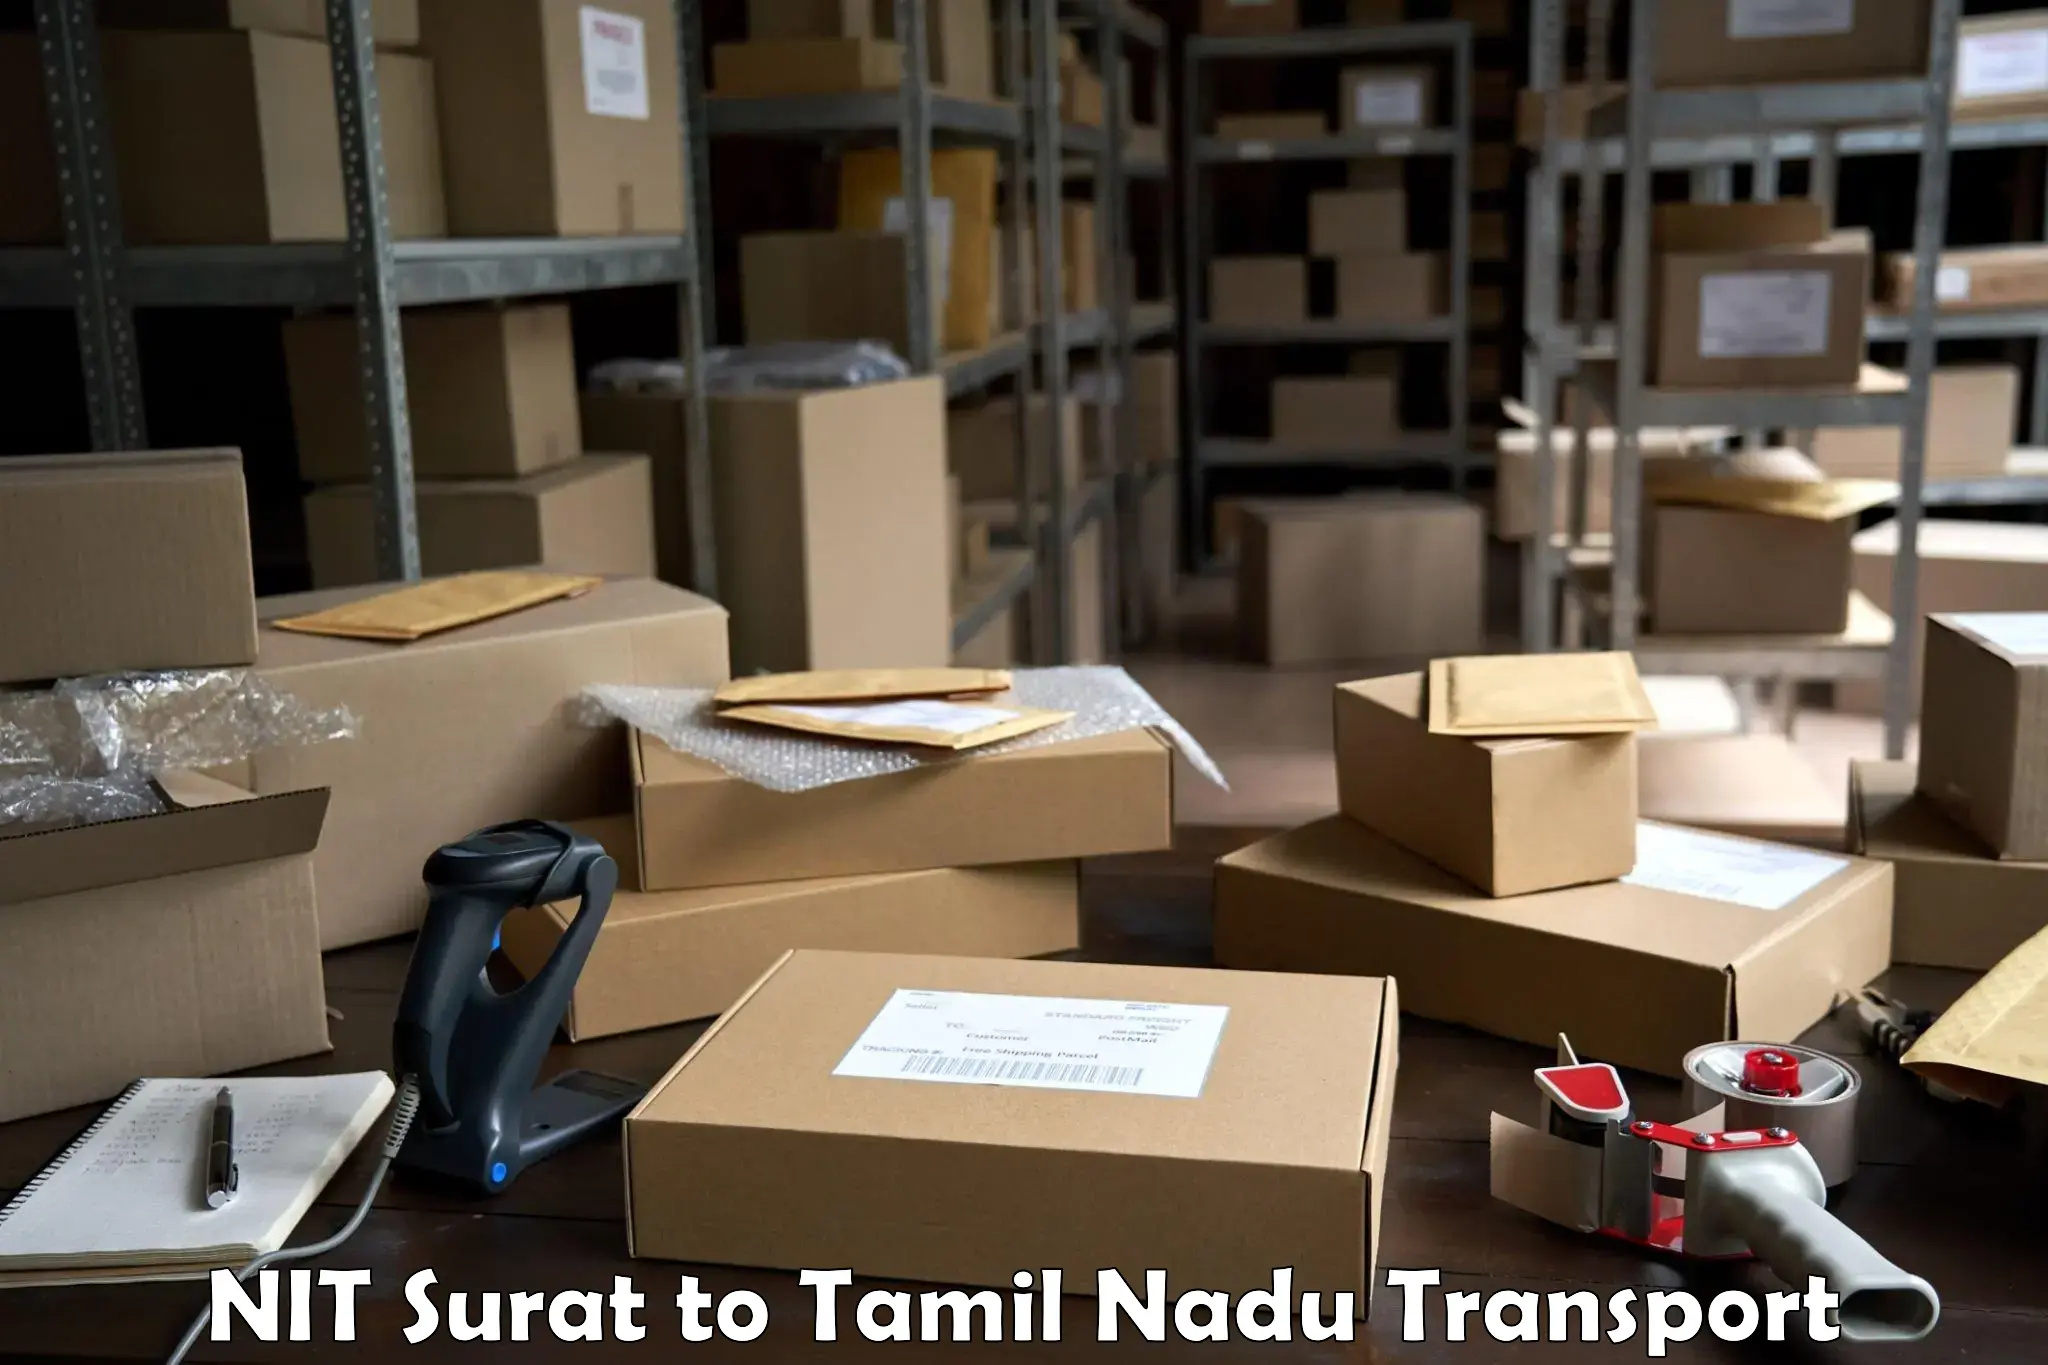 Container transport service NIT Surat to SRM Institute of Science and Technology Chennai